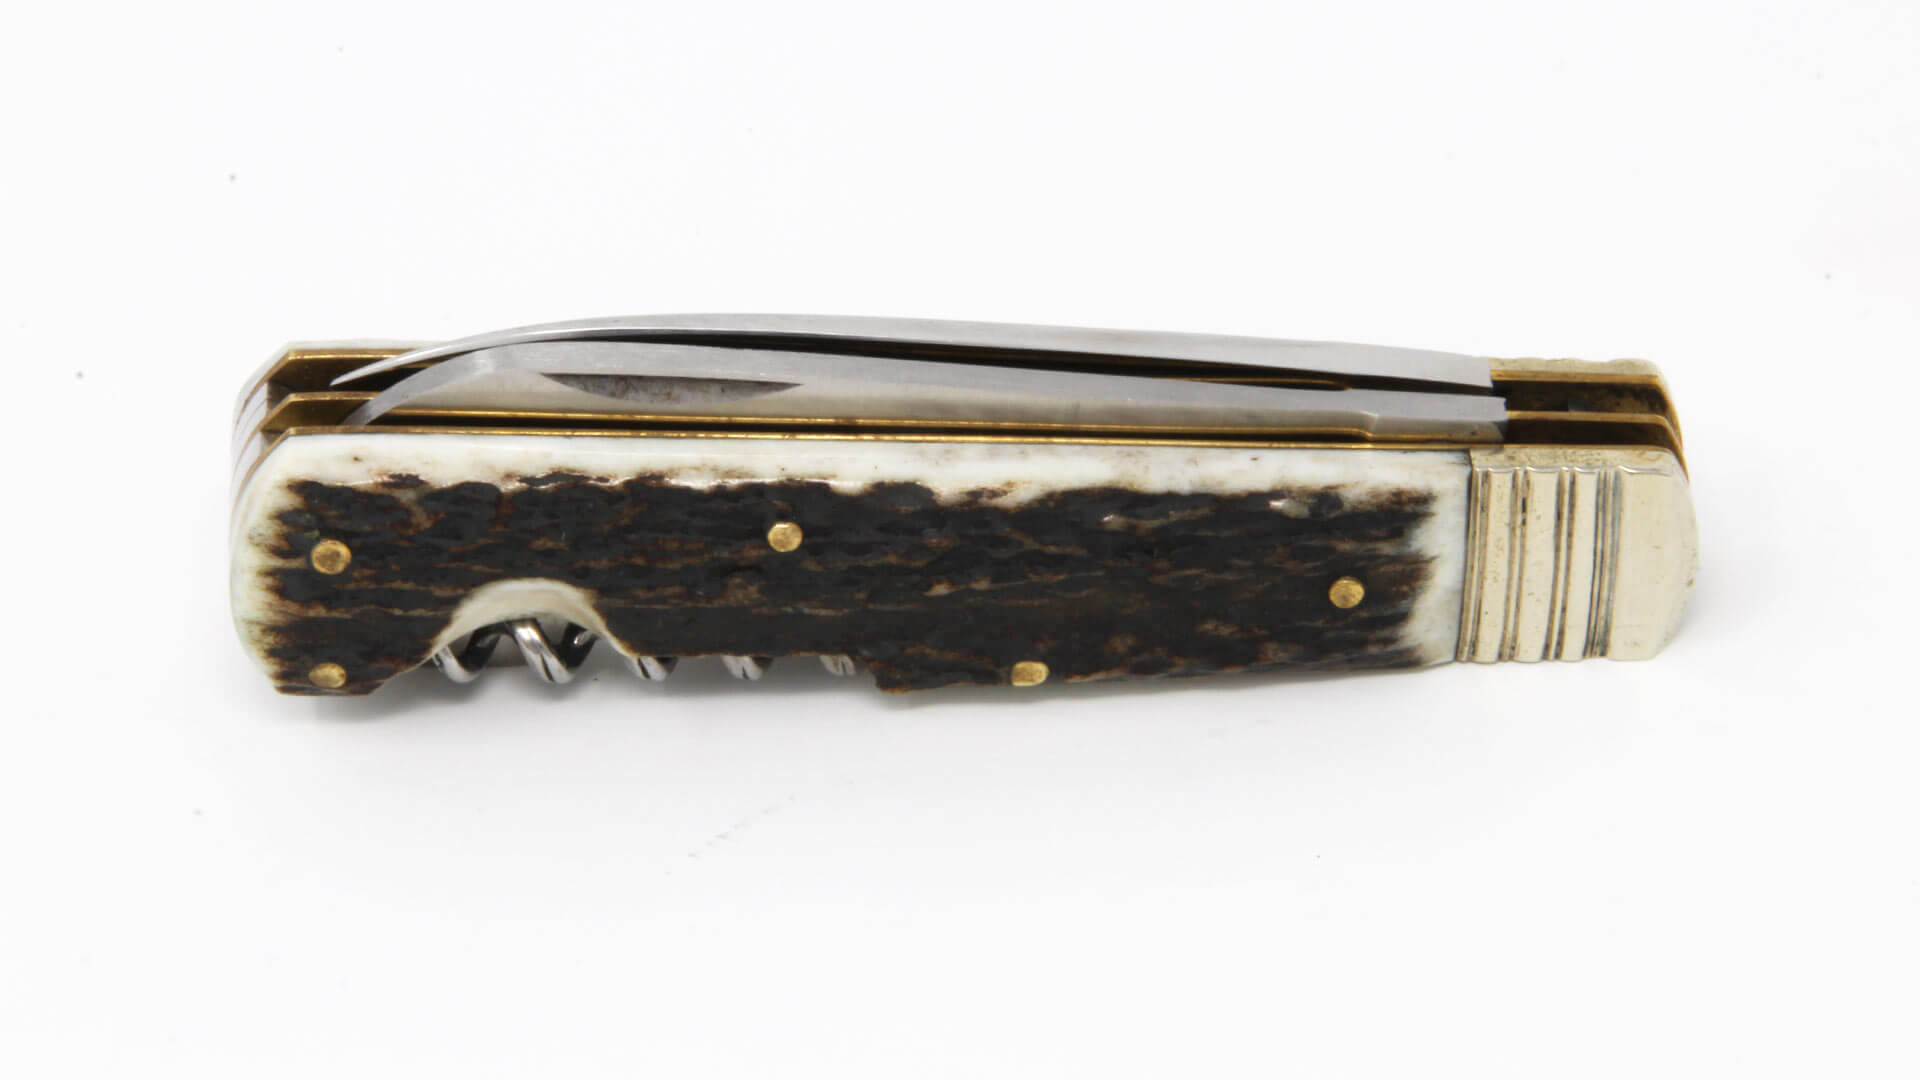 Hubertus Series 11 hunting pocket knife with saw folded in